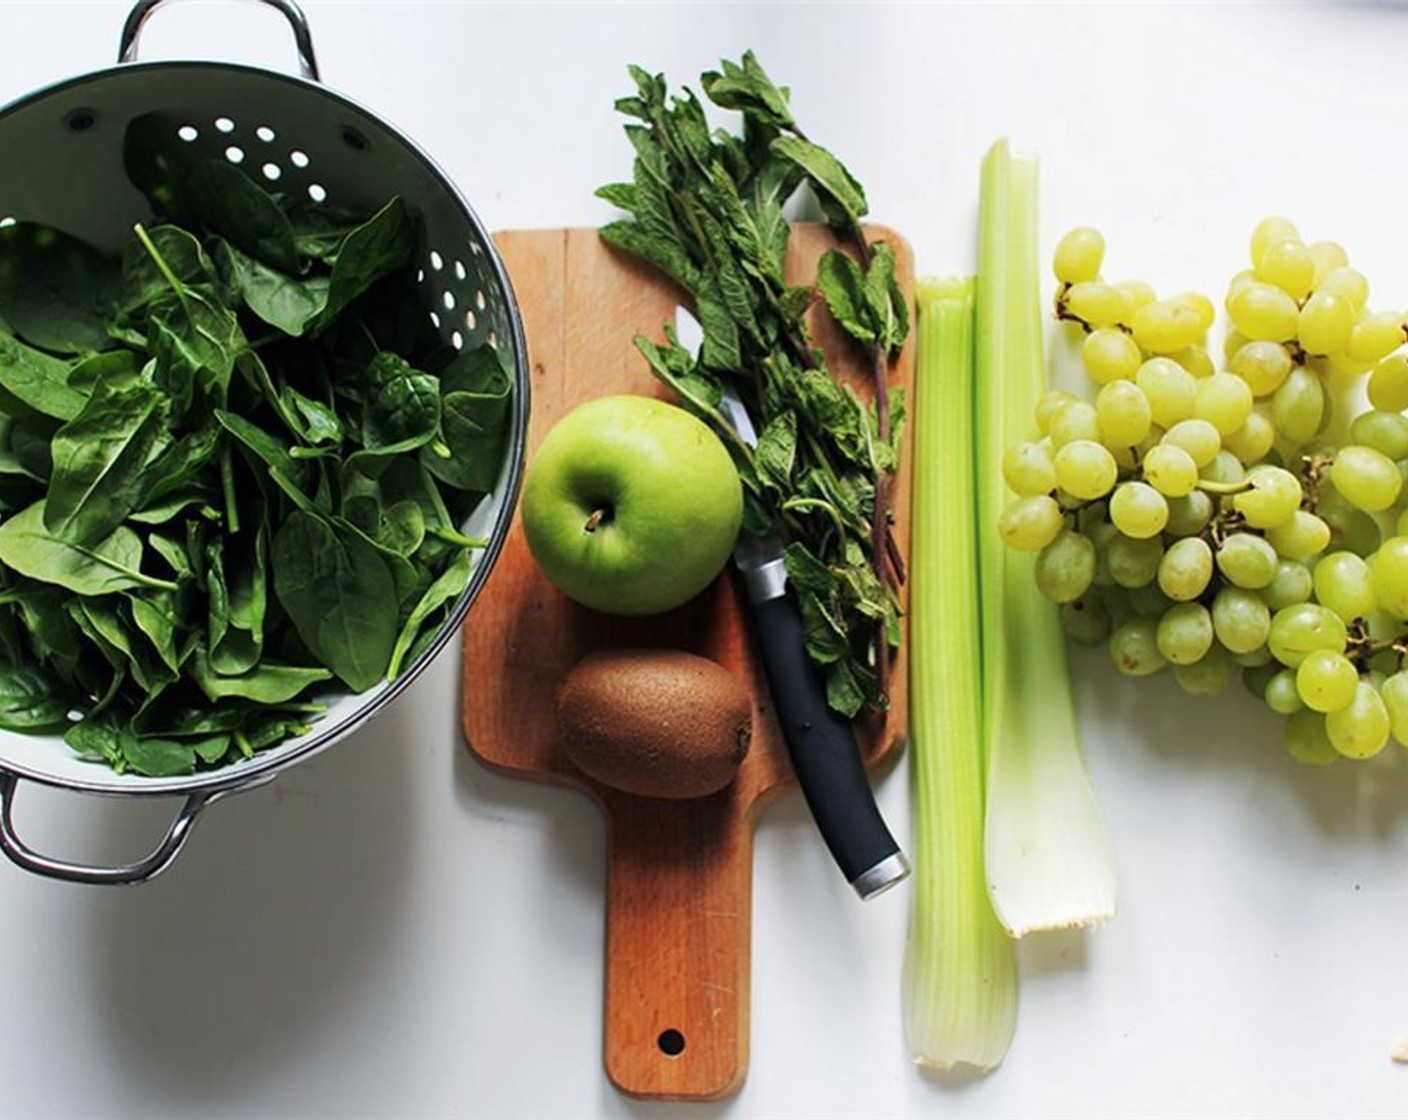 step 1 Cut the Celery (2 stalks) into chunks, the Green Apple (1) into pieces, and peel the Kiwifruit (1). Add cut ingredients, Fresh Mint (1 handful), Fresh Spinach (5 cups) and Grapes (1 pckg)  in a blender and whizz everything up!